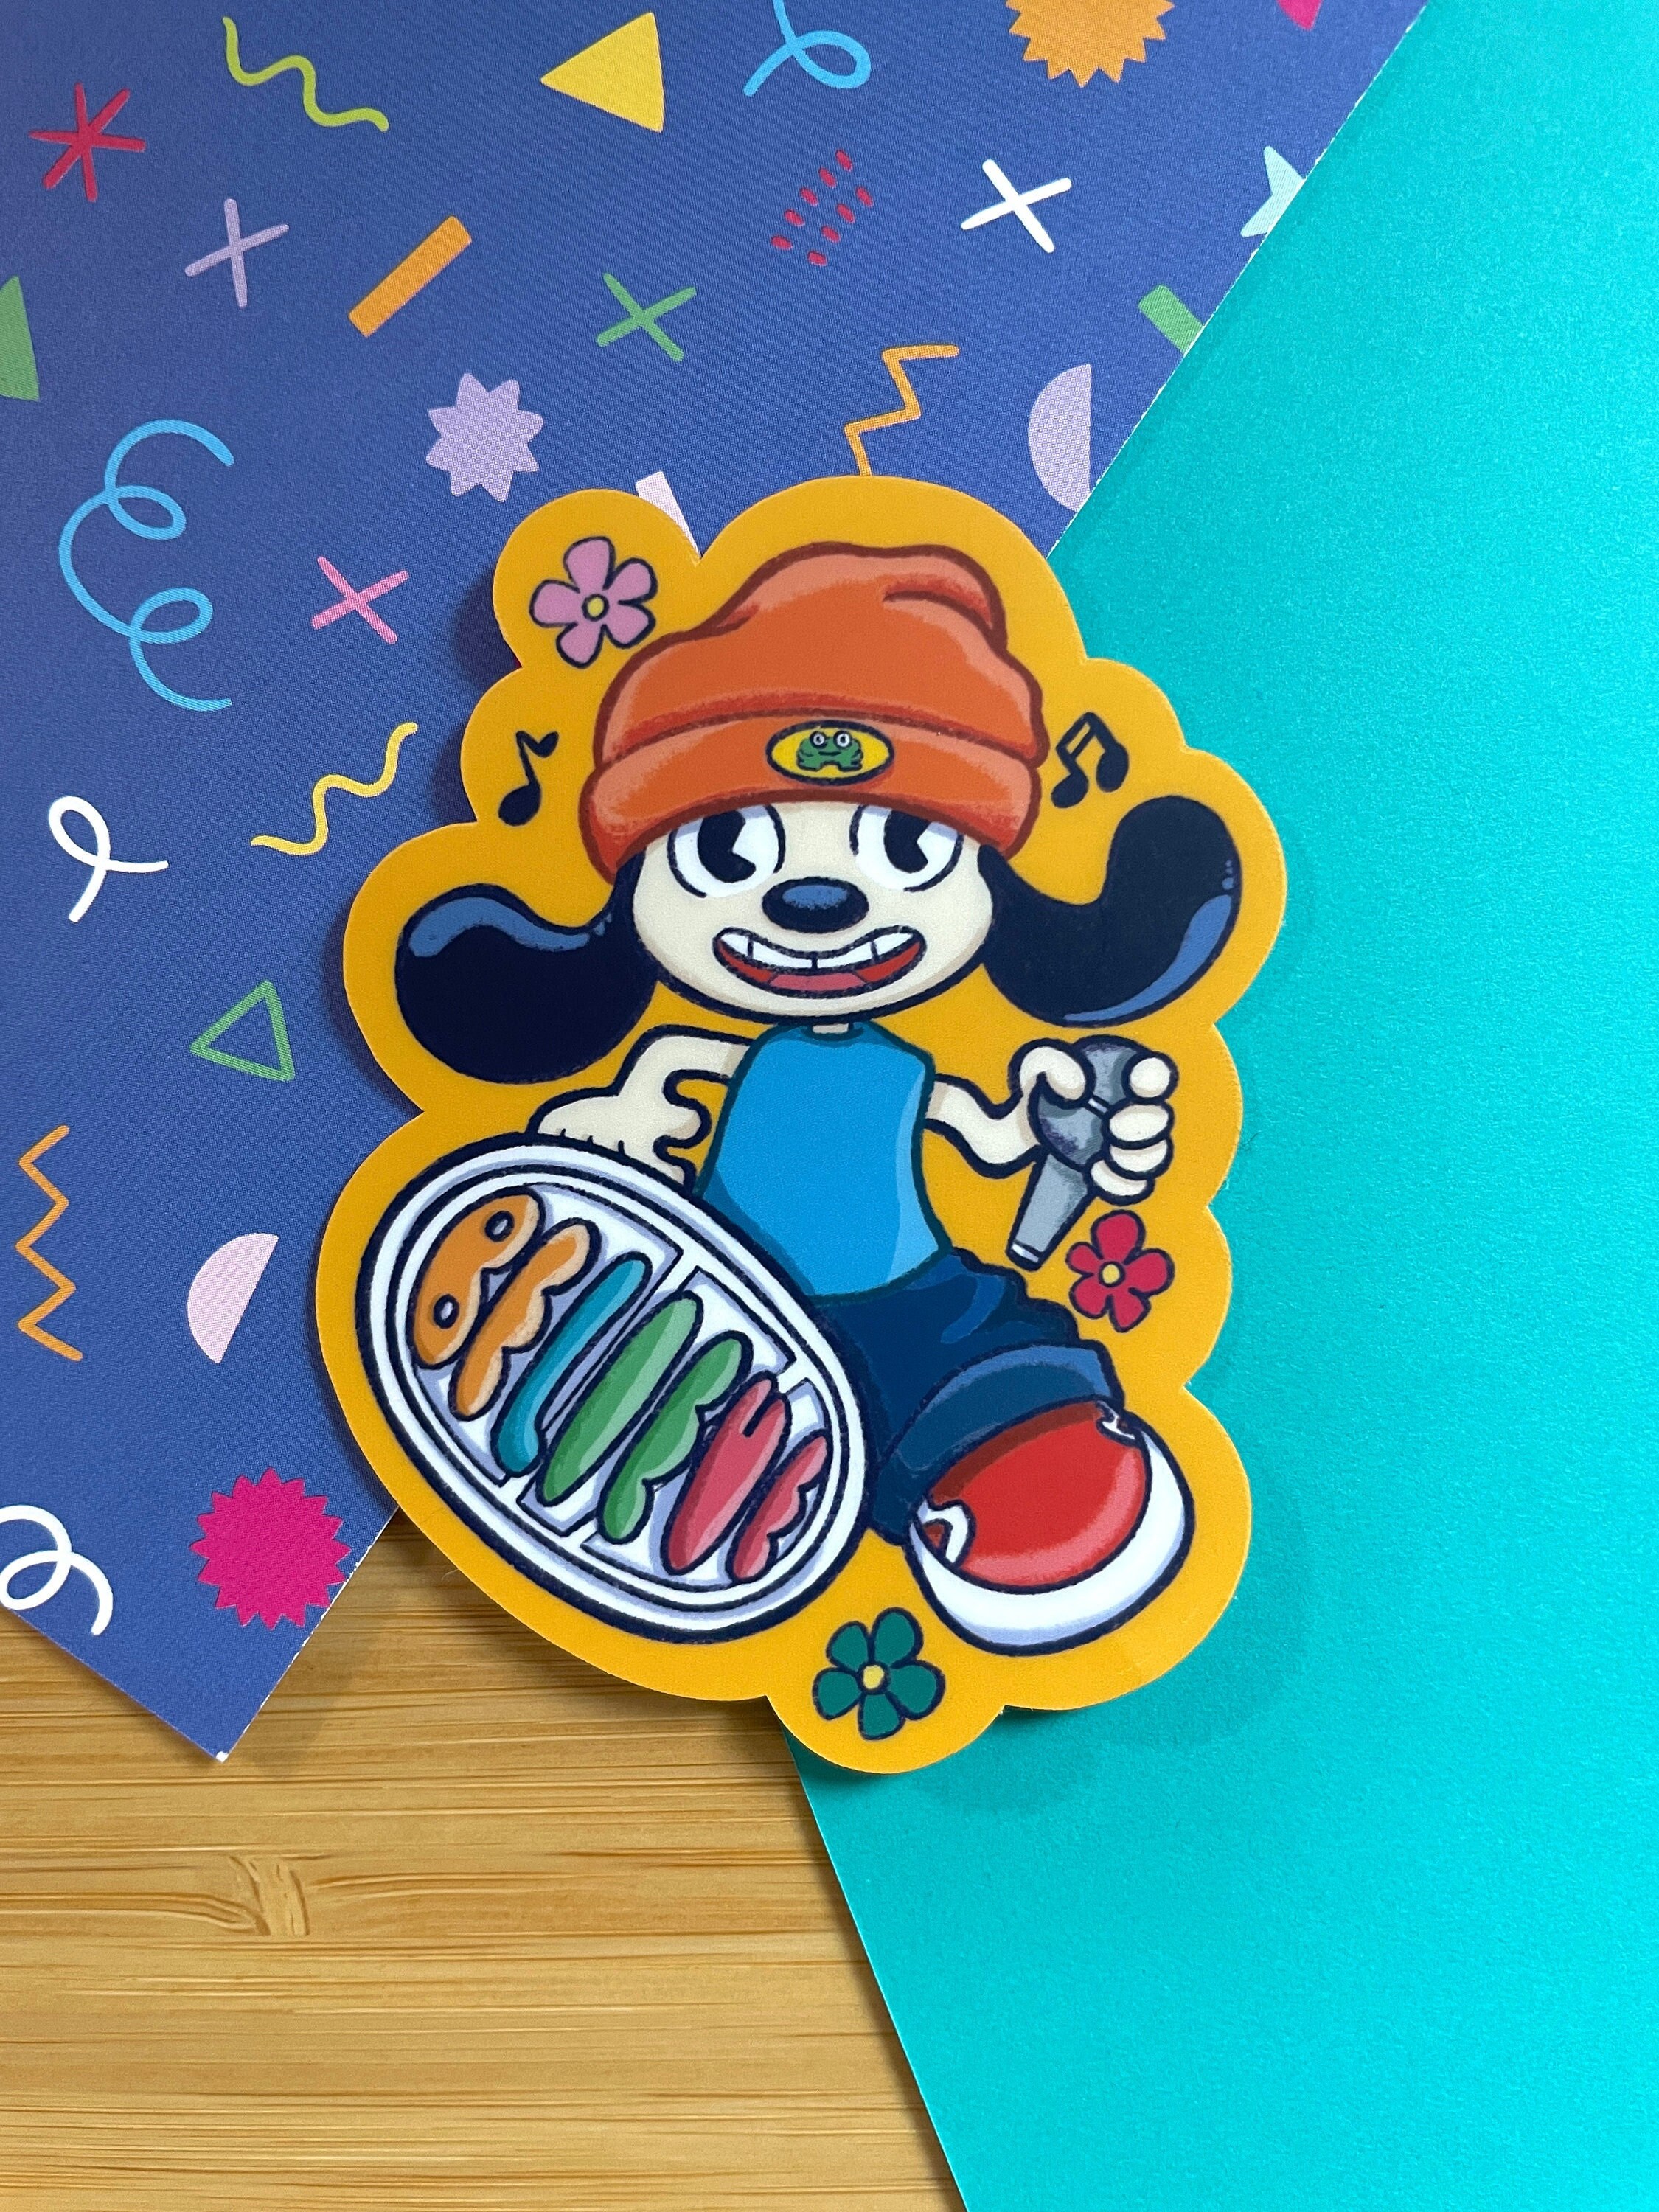 Parappa The Rapper (Forgotten Rhythm Game Characters Series) Sticker for  Sale by MajestyApparel